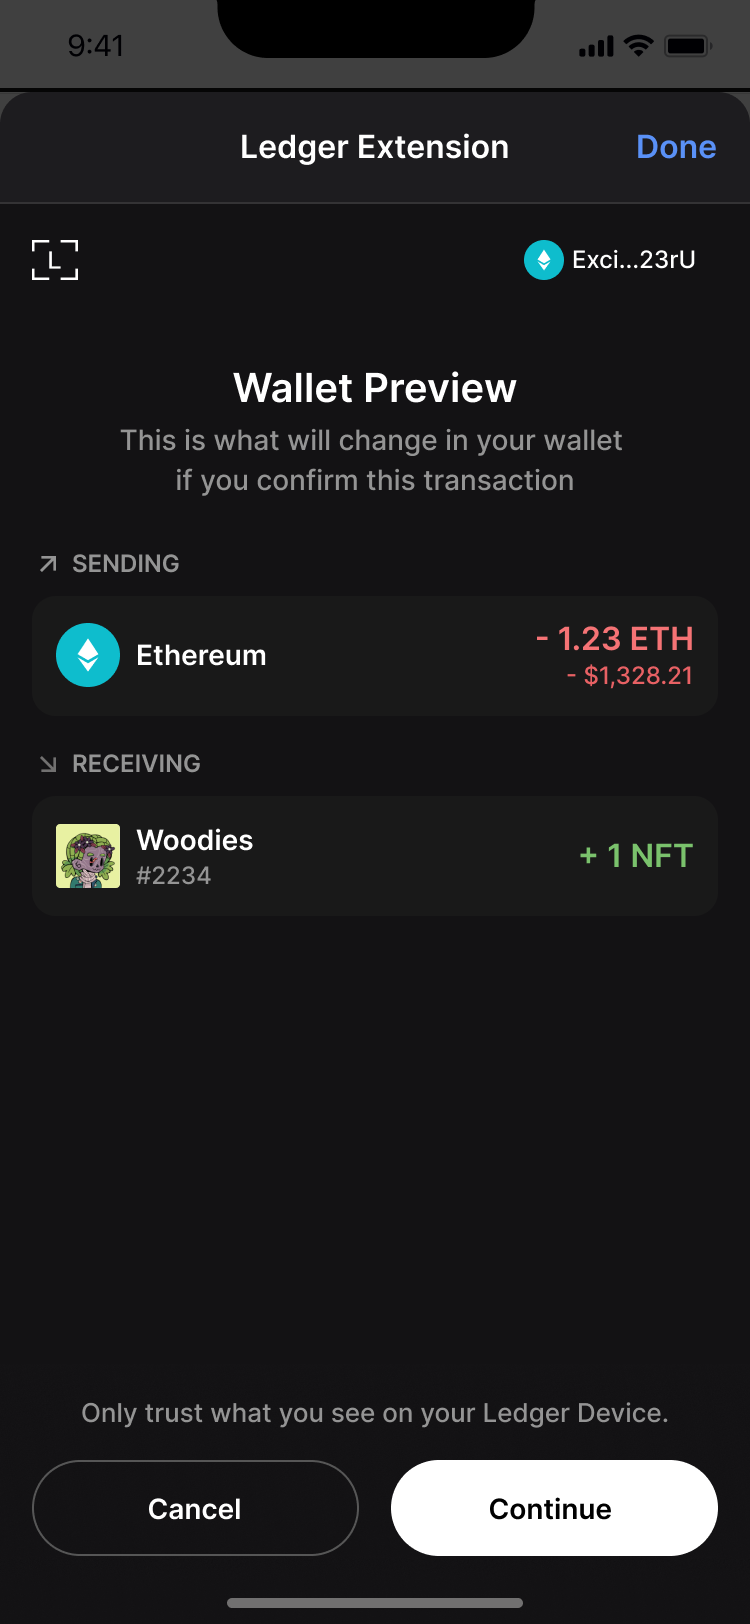 Wallet Preview